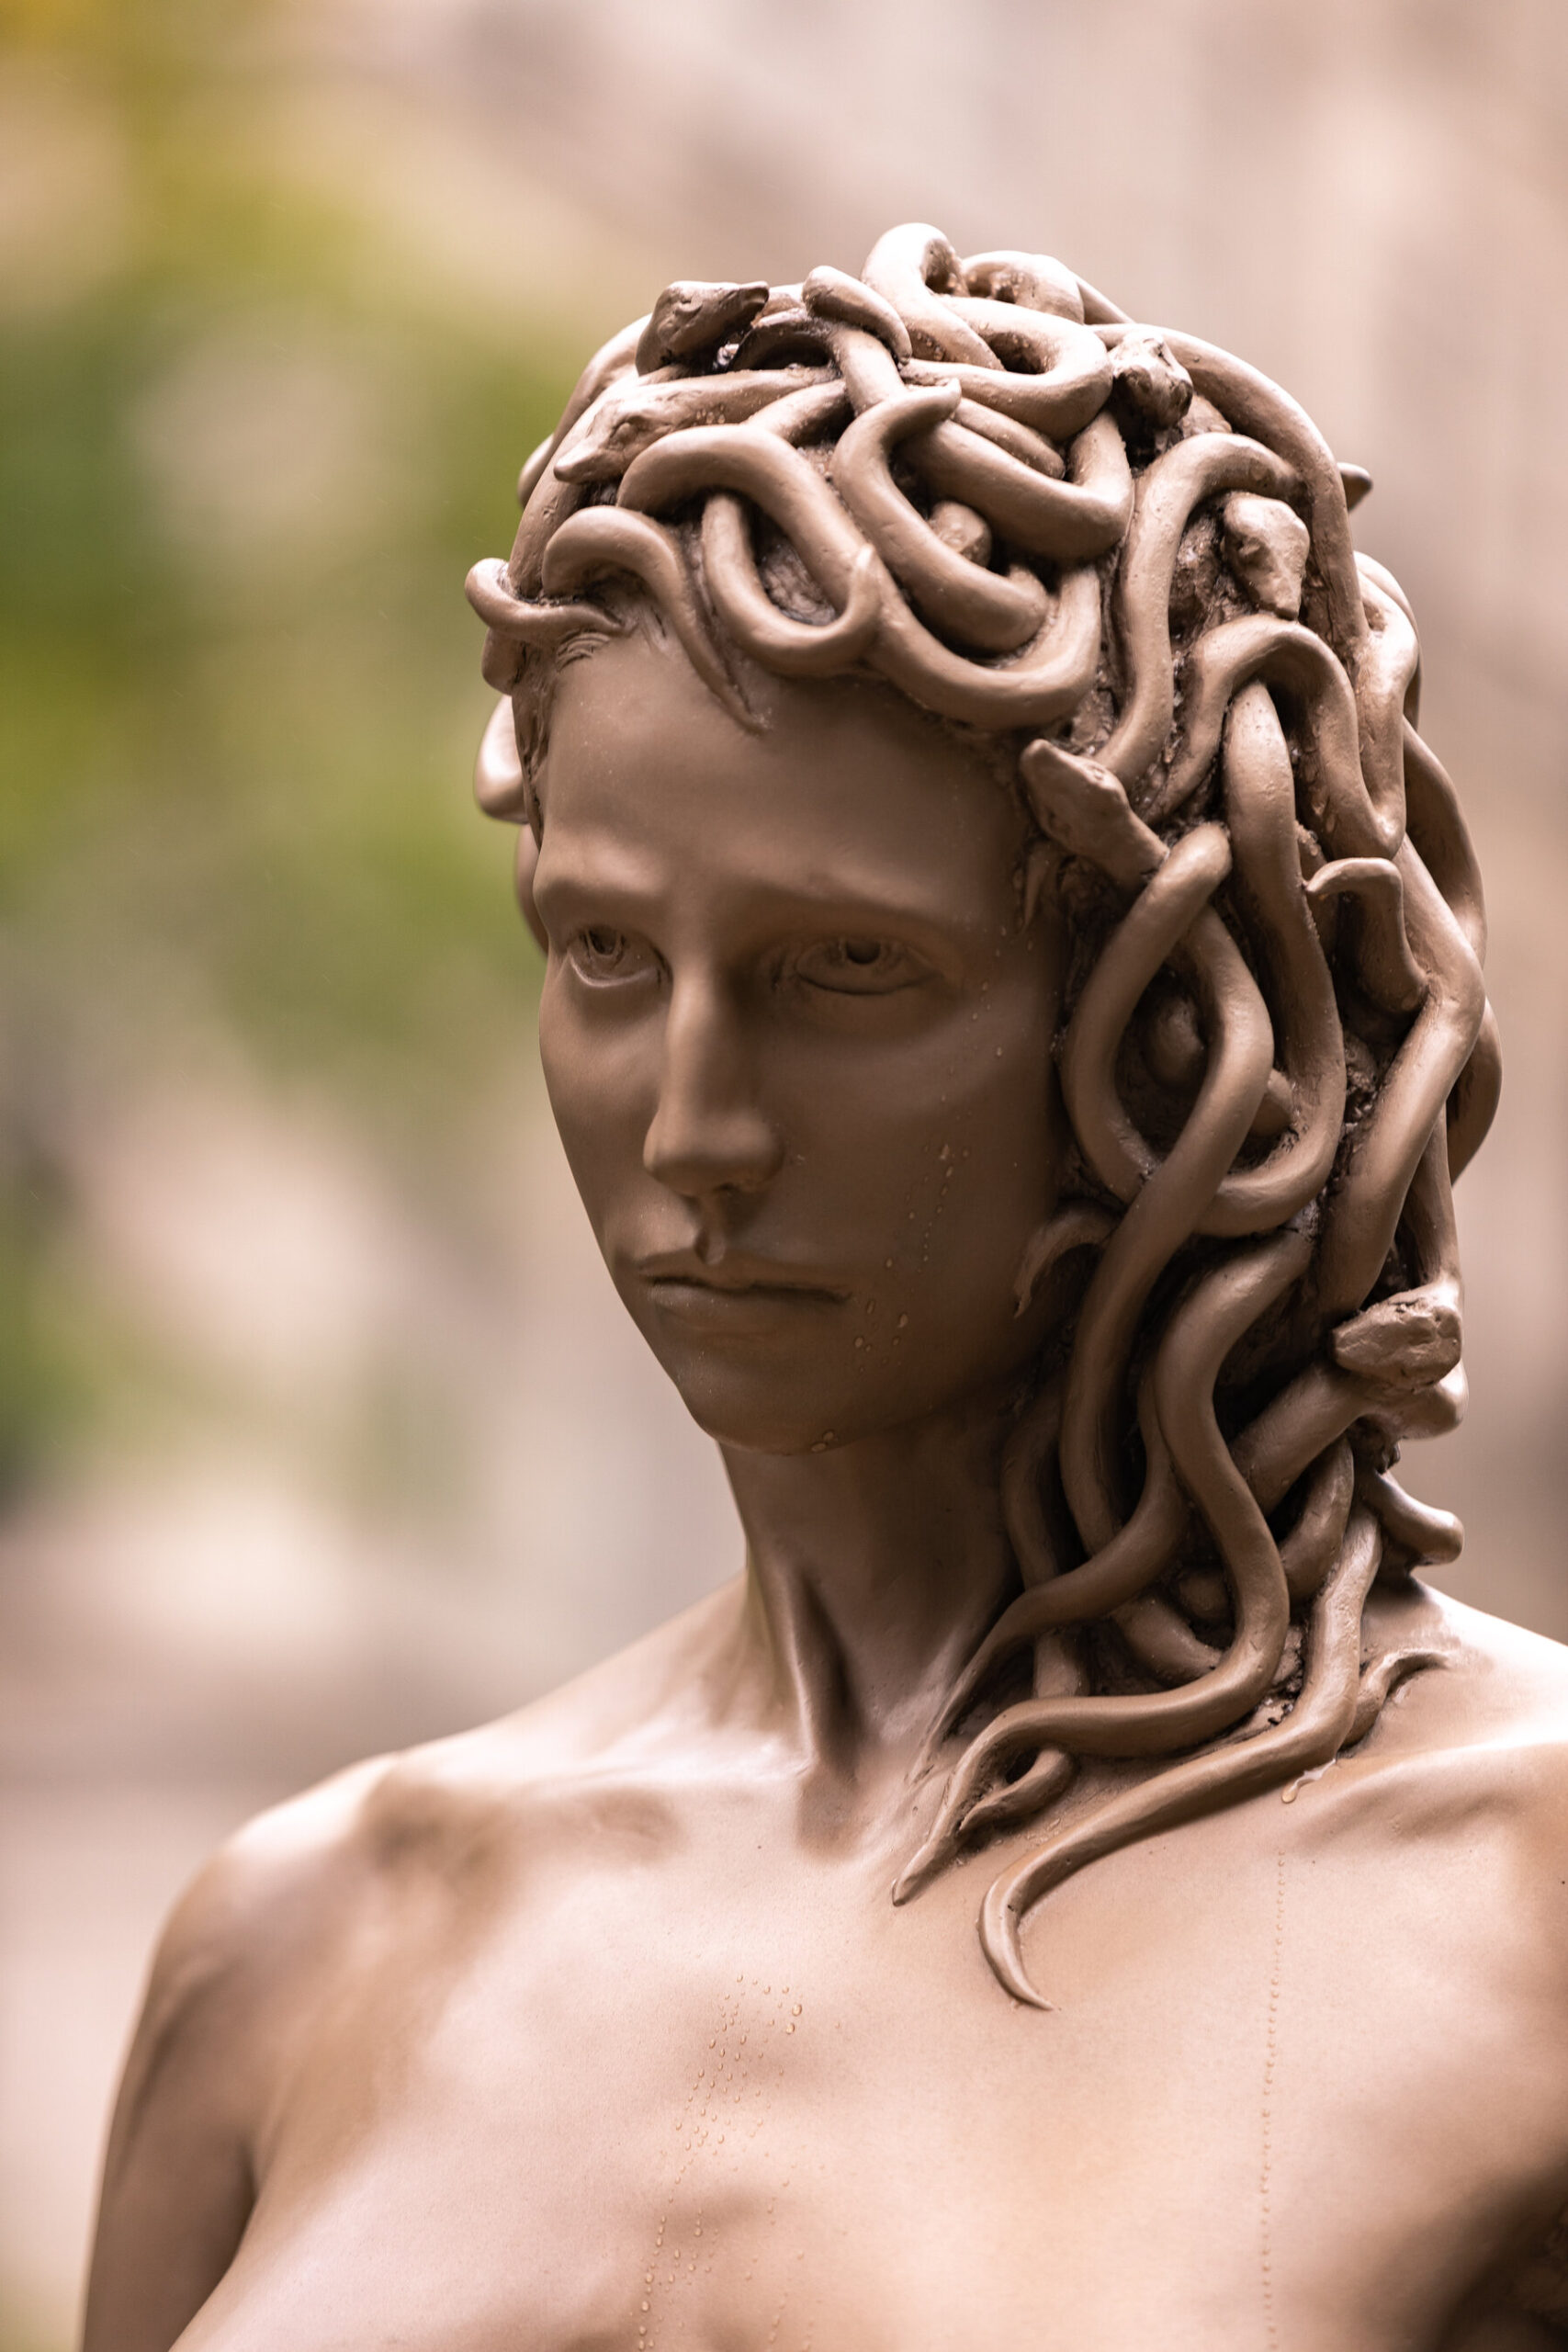 Many people know the story of the Medusa from Greek mythology